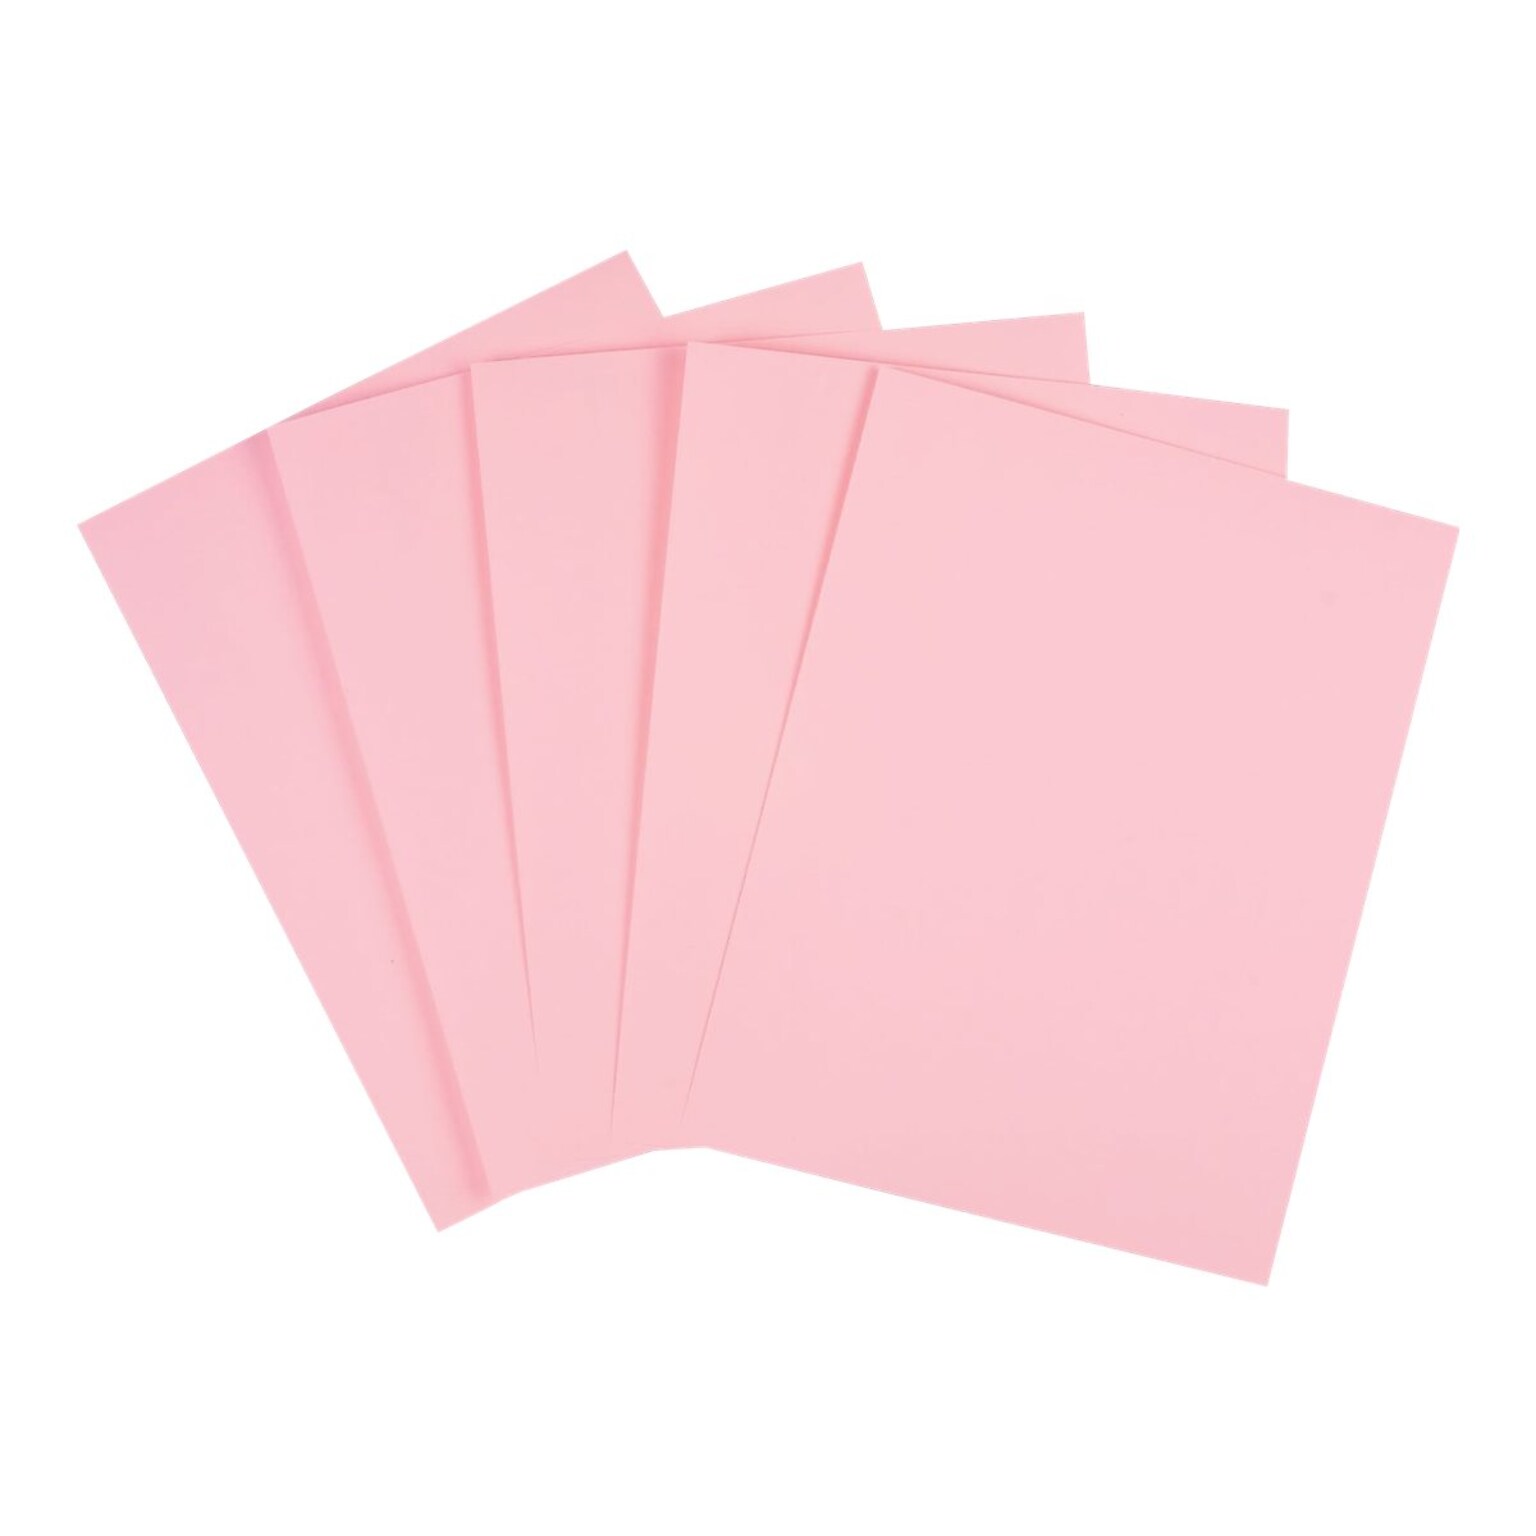 Staples Pastel 30% Recycled Colored Paper, 20 Lbs., 8.5 x 11, Pink, 5000/Carton (14779-AA)